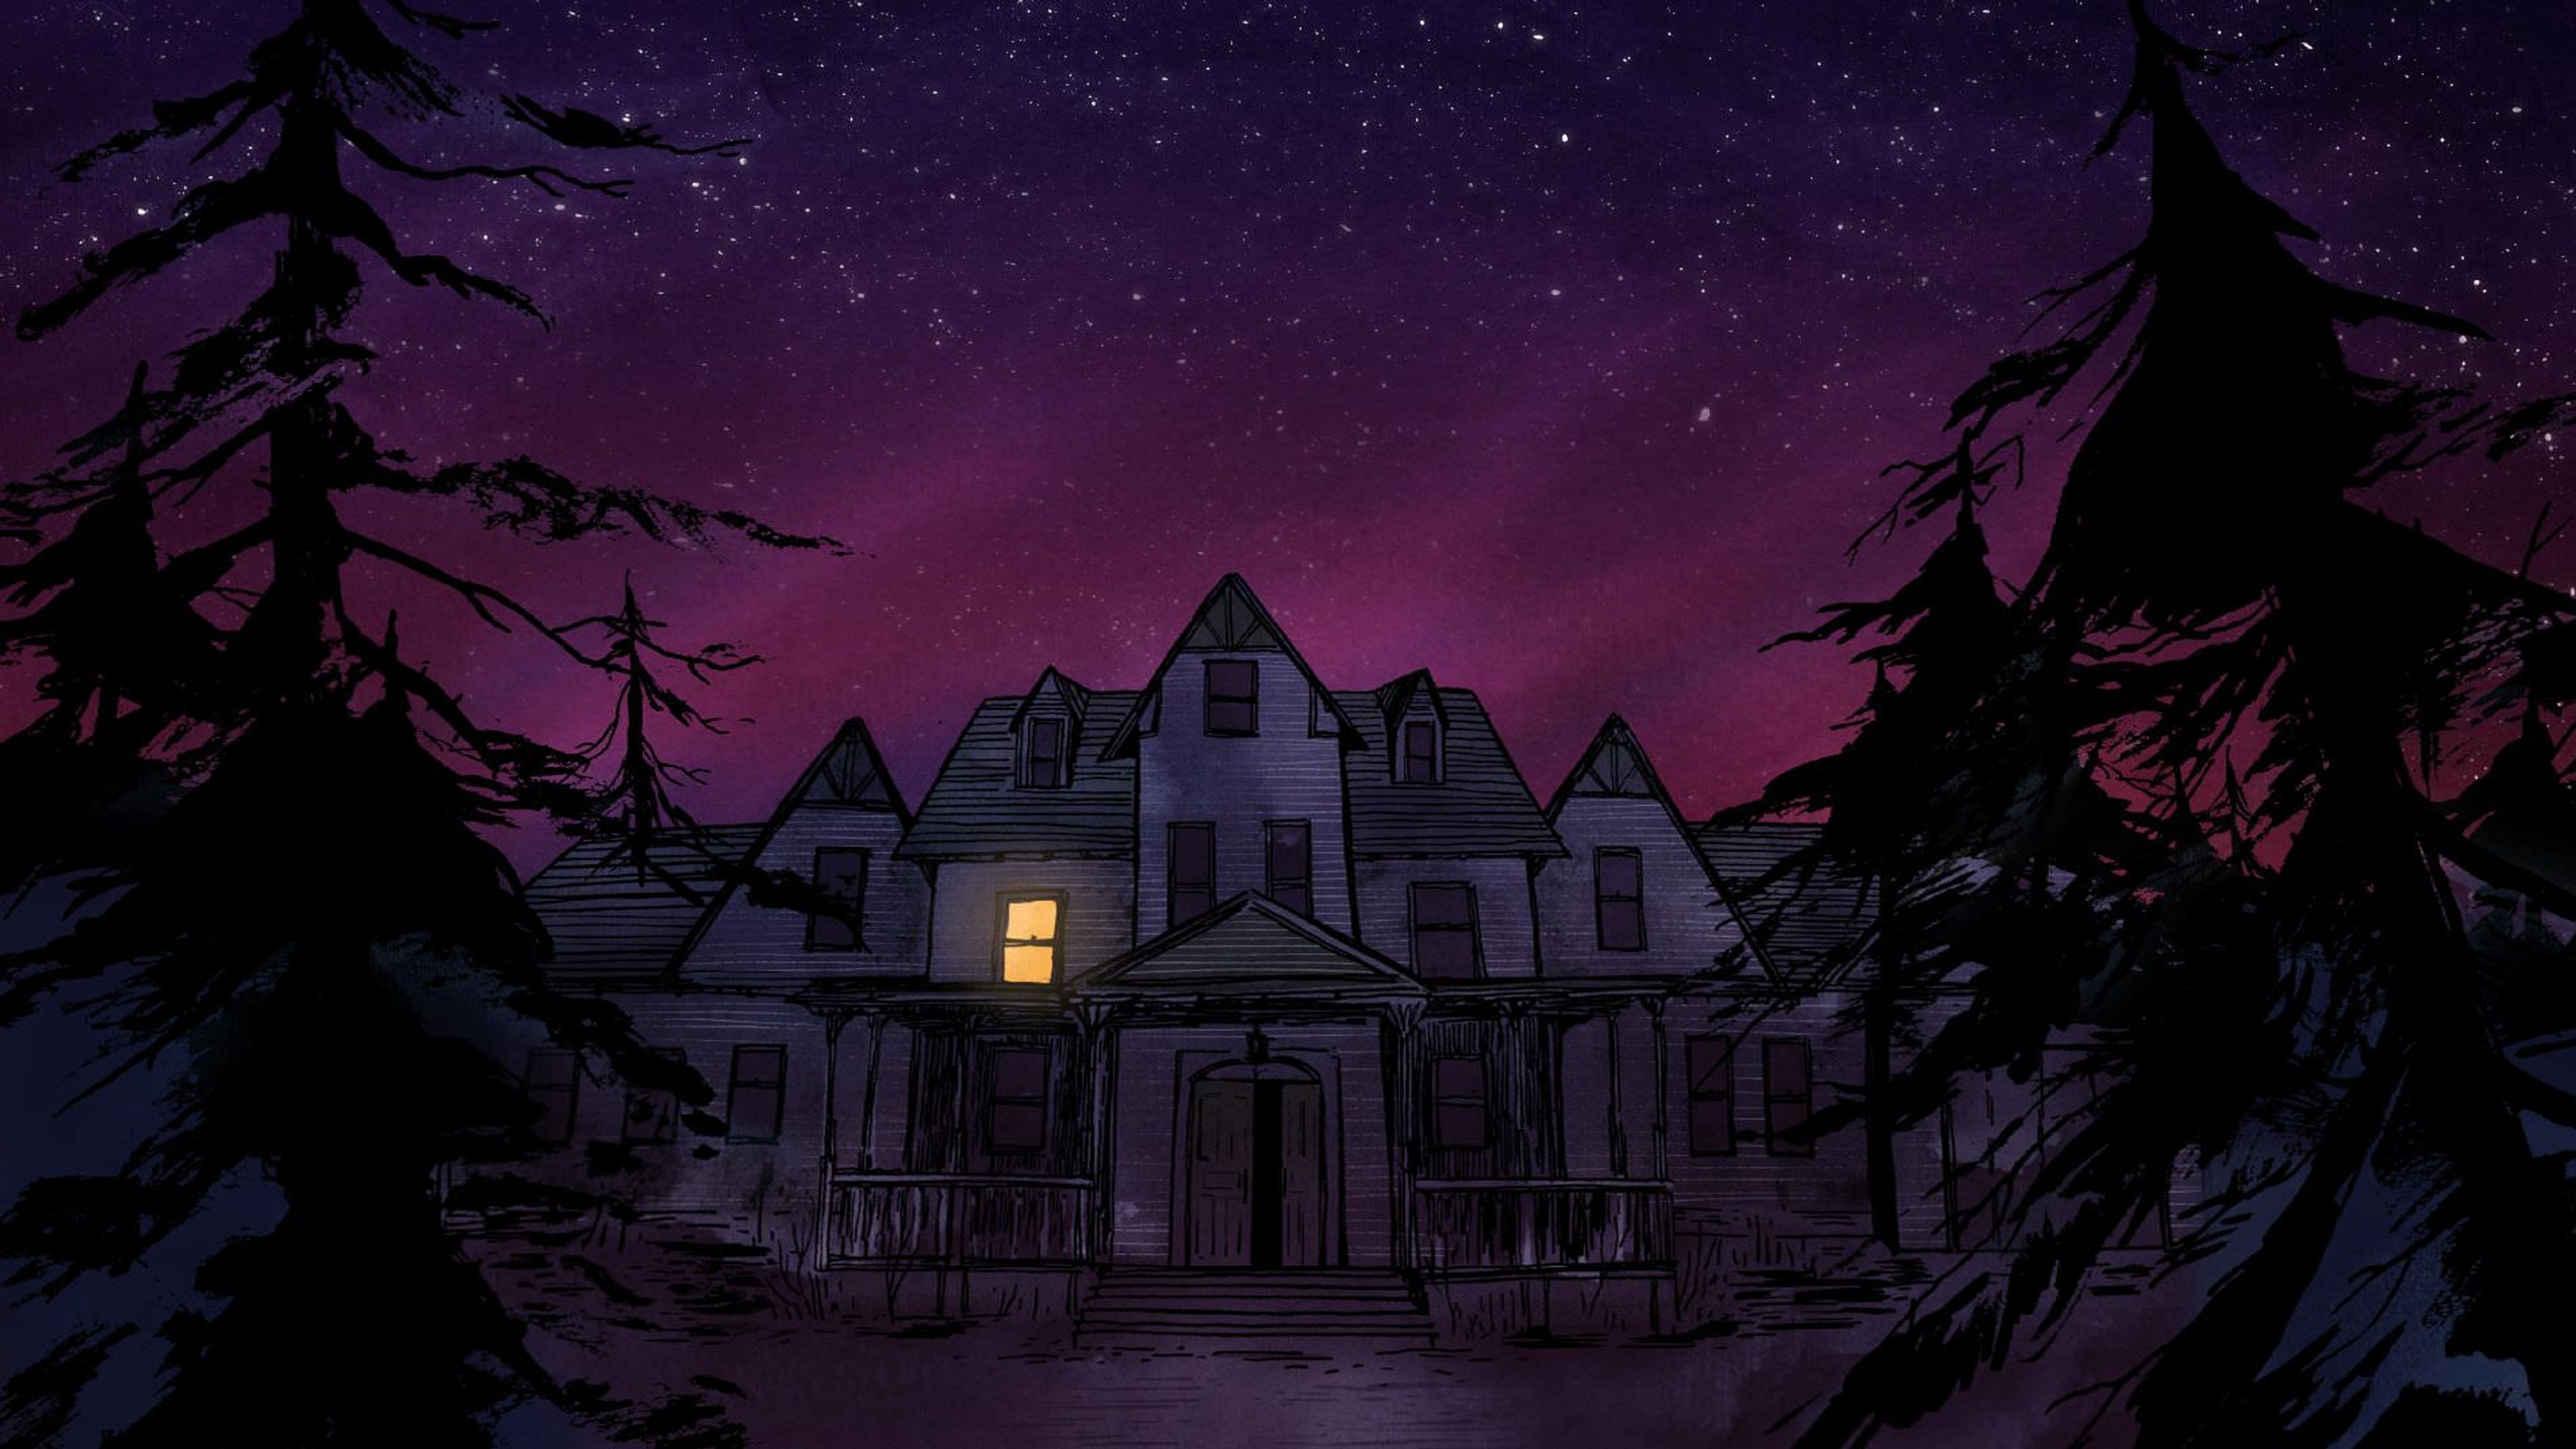 1 13 ночи. Gone Home игра. Gone Home (2013). Gone Home Art. Gone Home background.